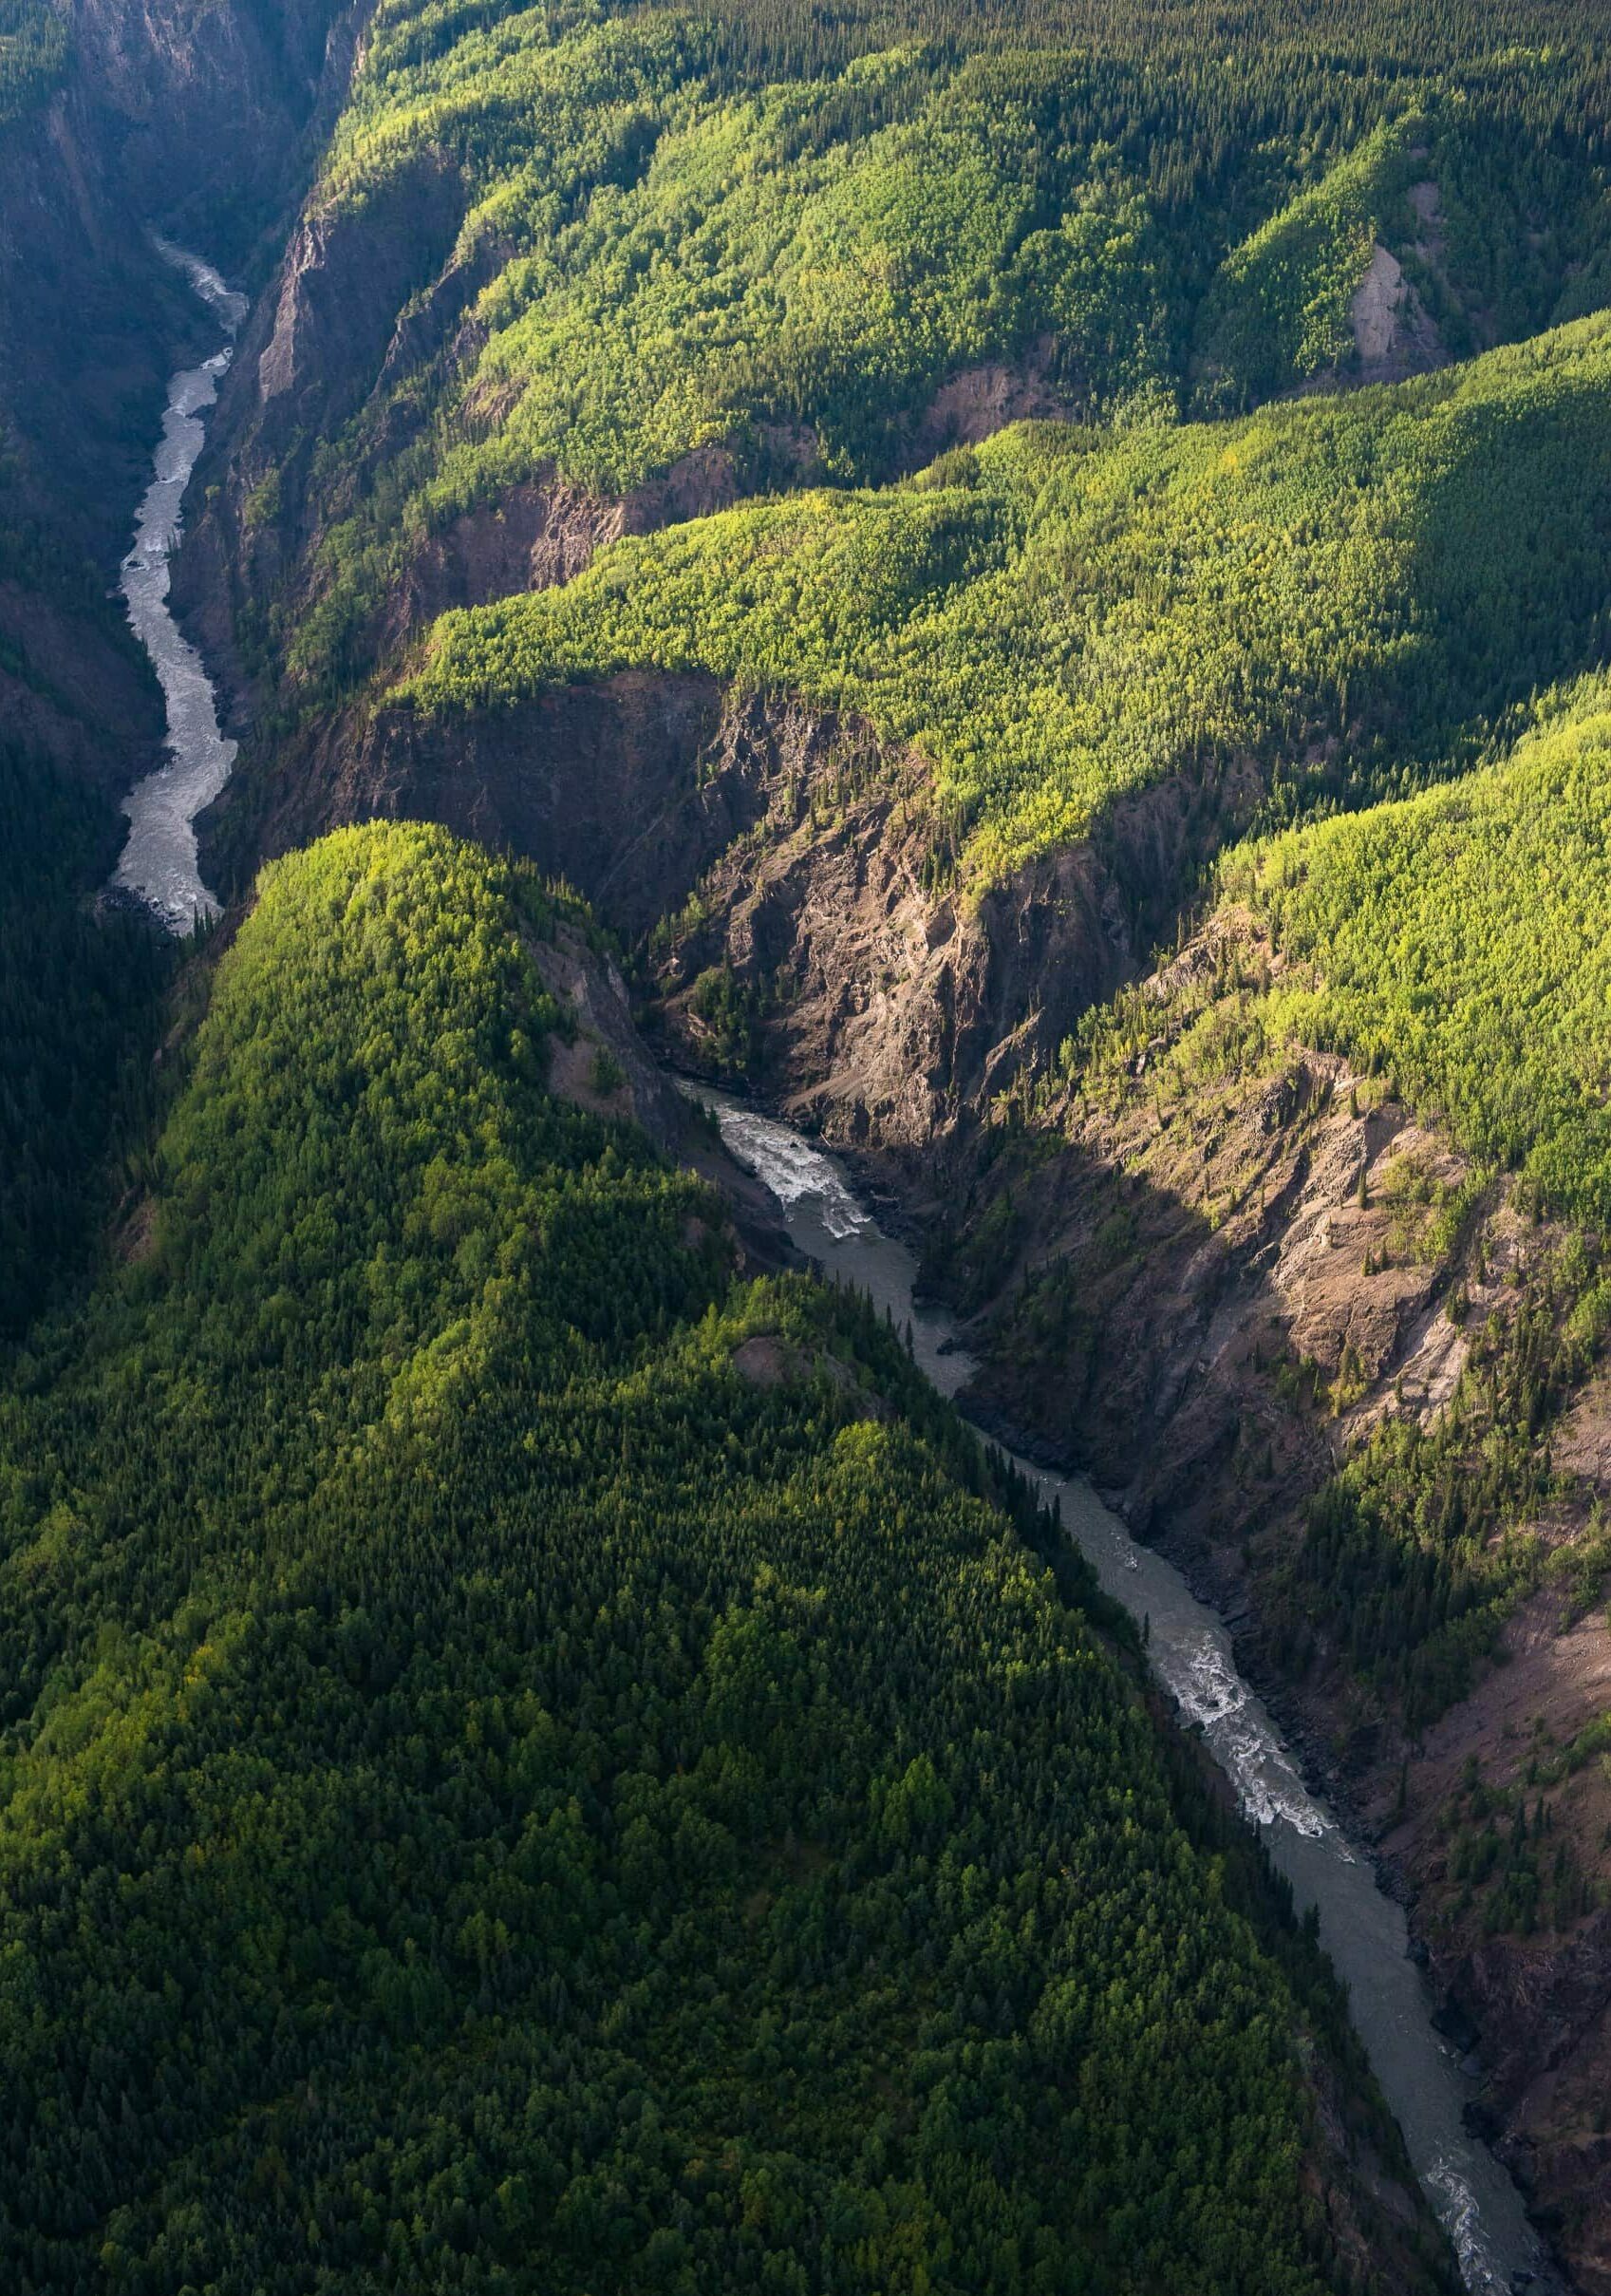 aerial view of Stikine River cutting through Grand Canyon